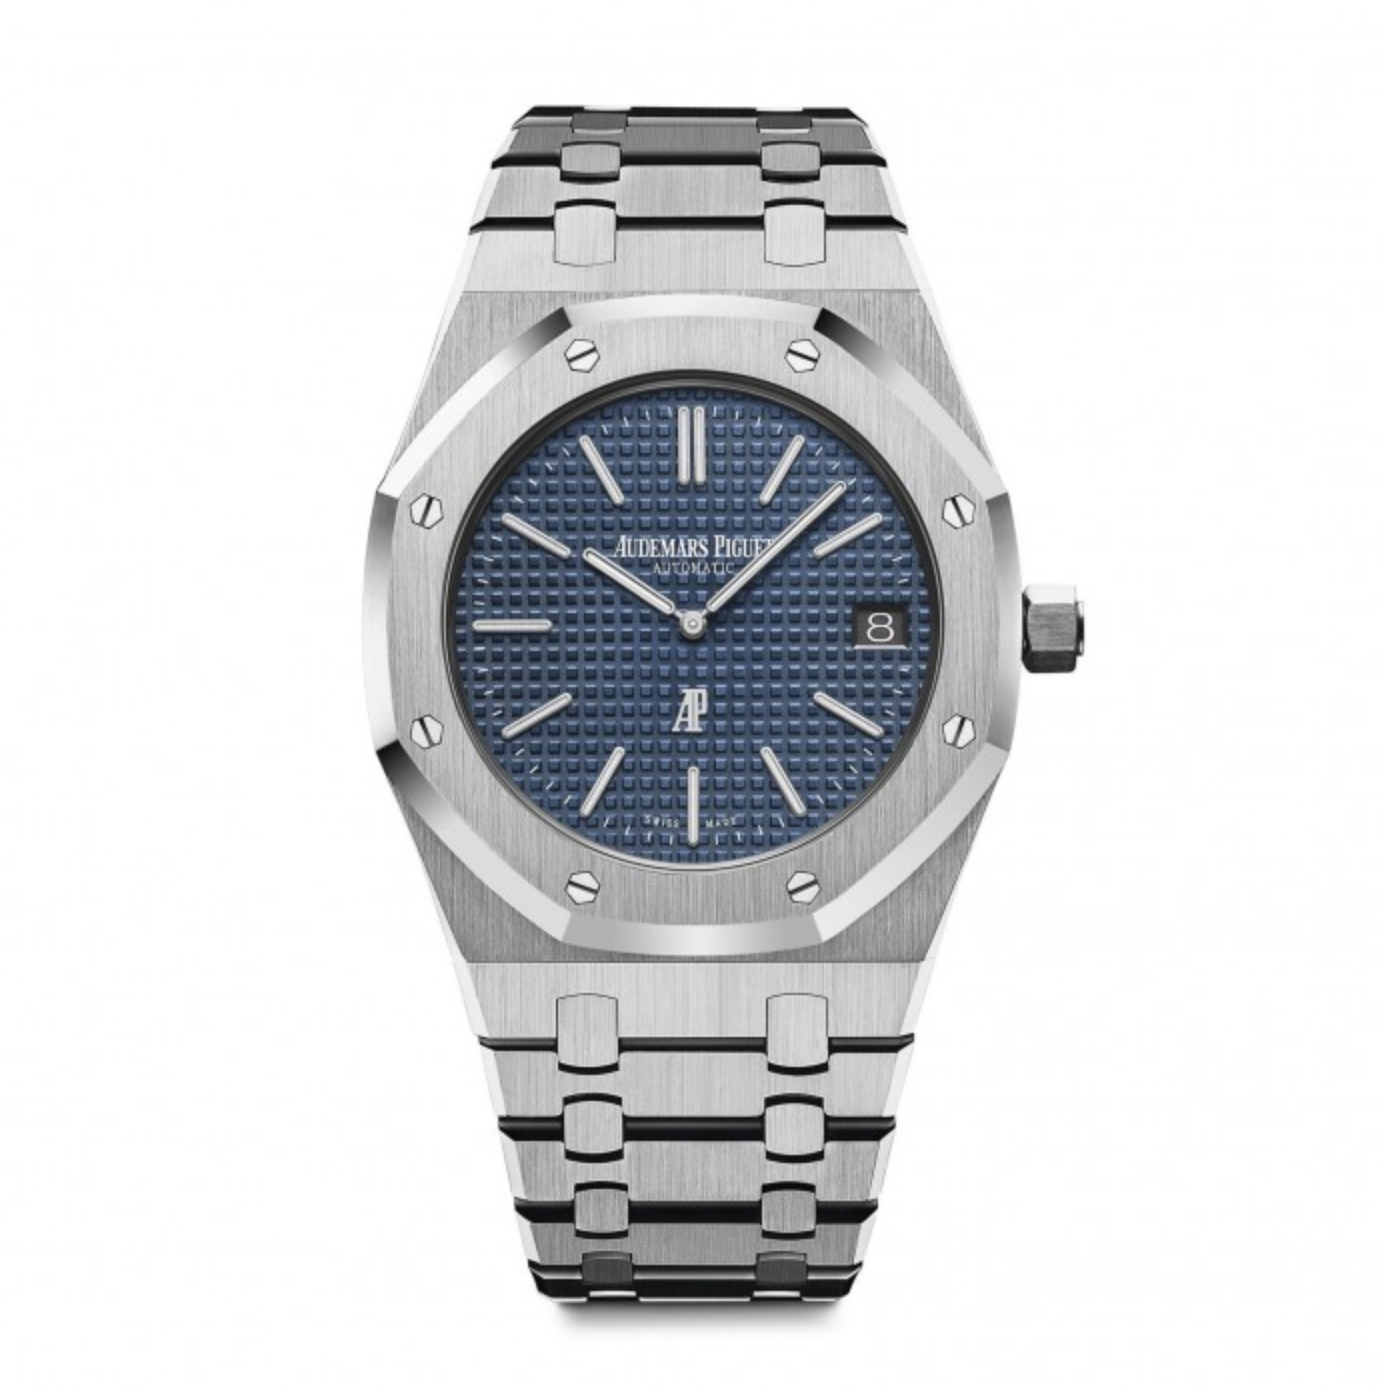 AP ROYAL OAK EXTRA THIN 39MM 15202ST.OO.1240ST.01 SS BLUE DIAL SWISS 2121 - IP Empire Replica Watches